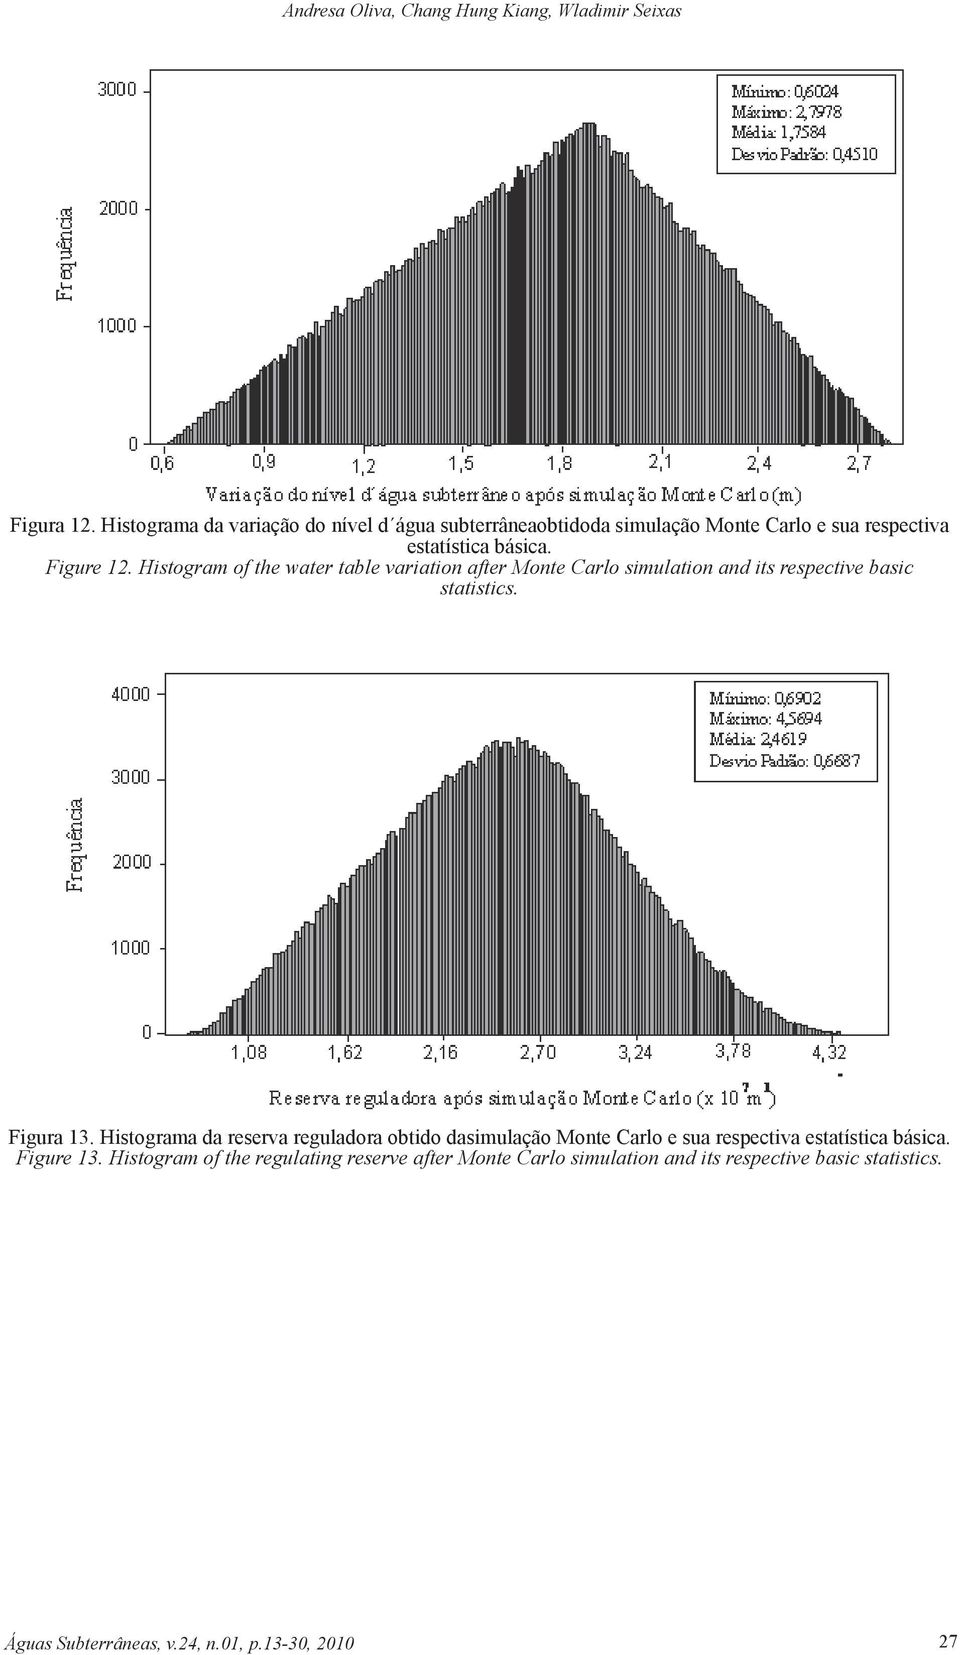 Histogram of the water table variation after Monte Carlo simulation and its respective basic statistics. Figura 13.